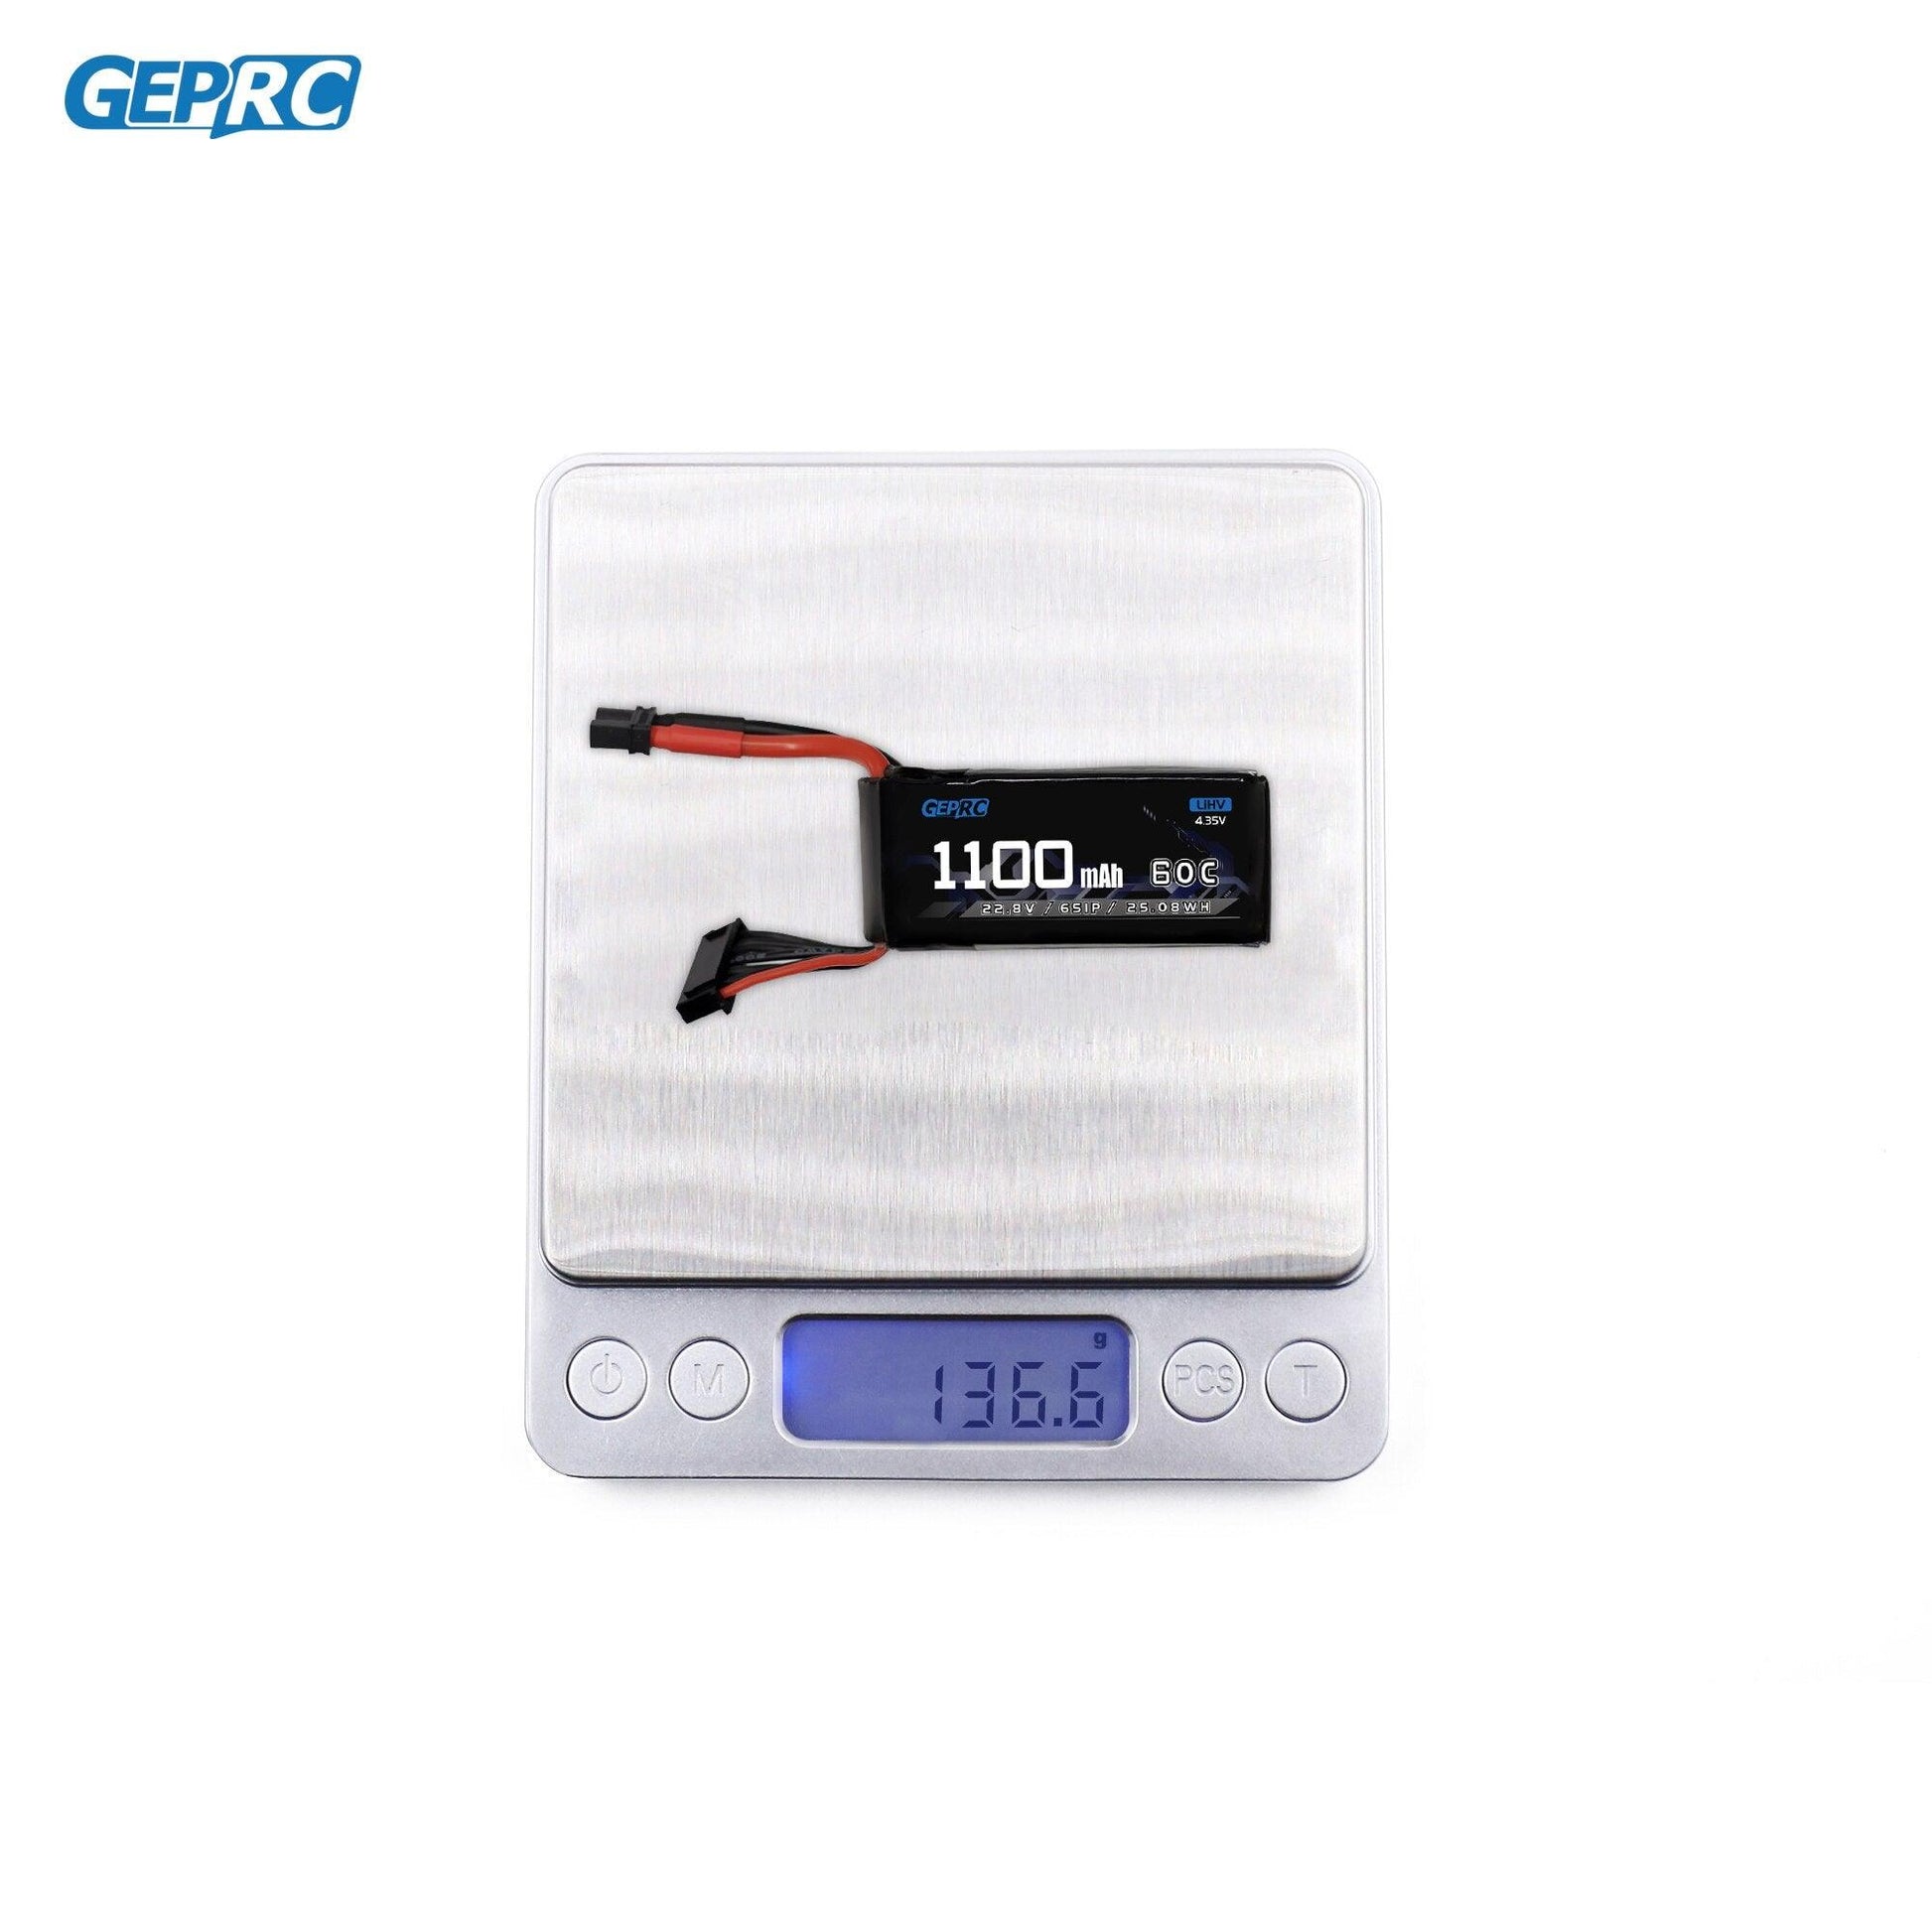 GEPRC 6S 1100mAh 60C LiPo Battery - Suitable For 3-5Inch Series Drone For RC FPV Quadcopter Freestyle Drone Accessories Parts FPV Drone Battery - RCDrone